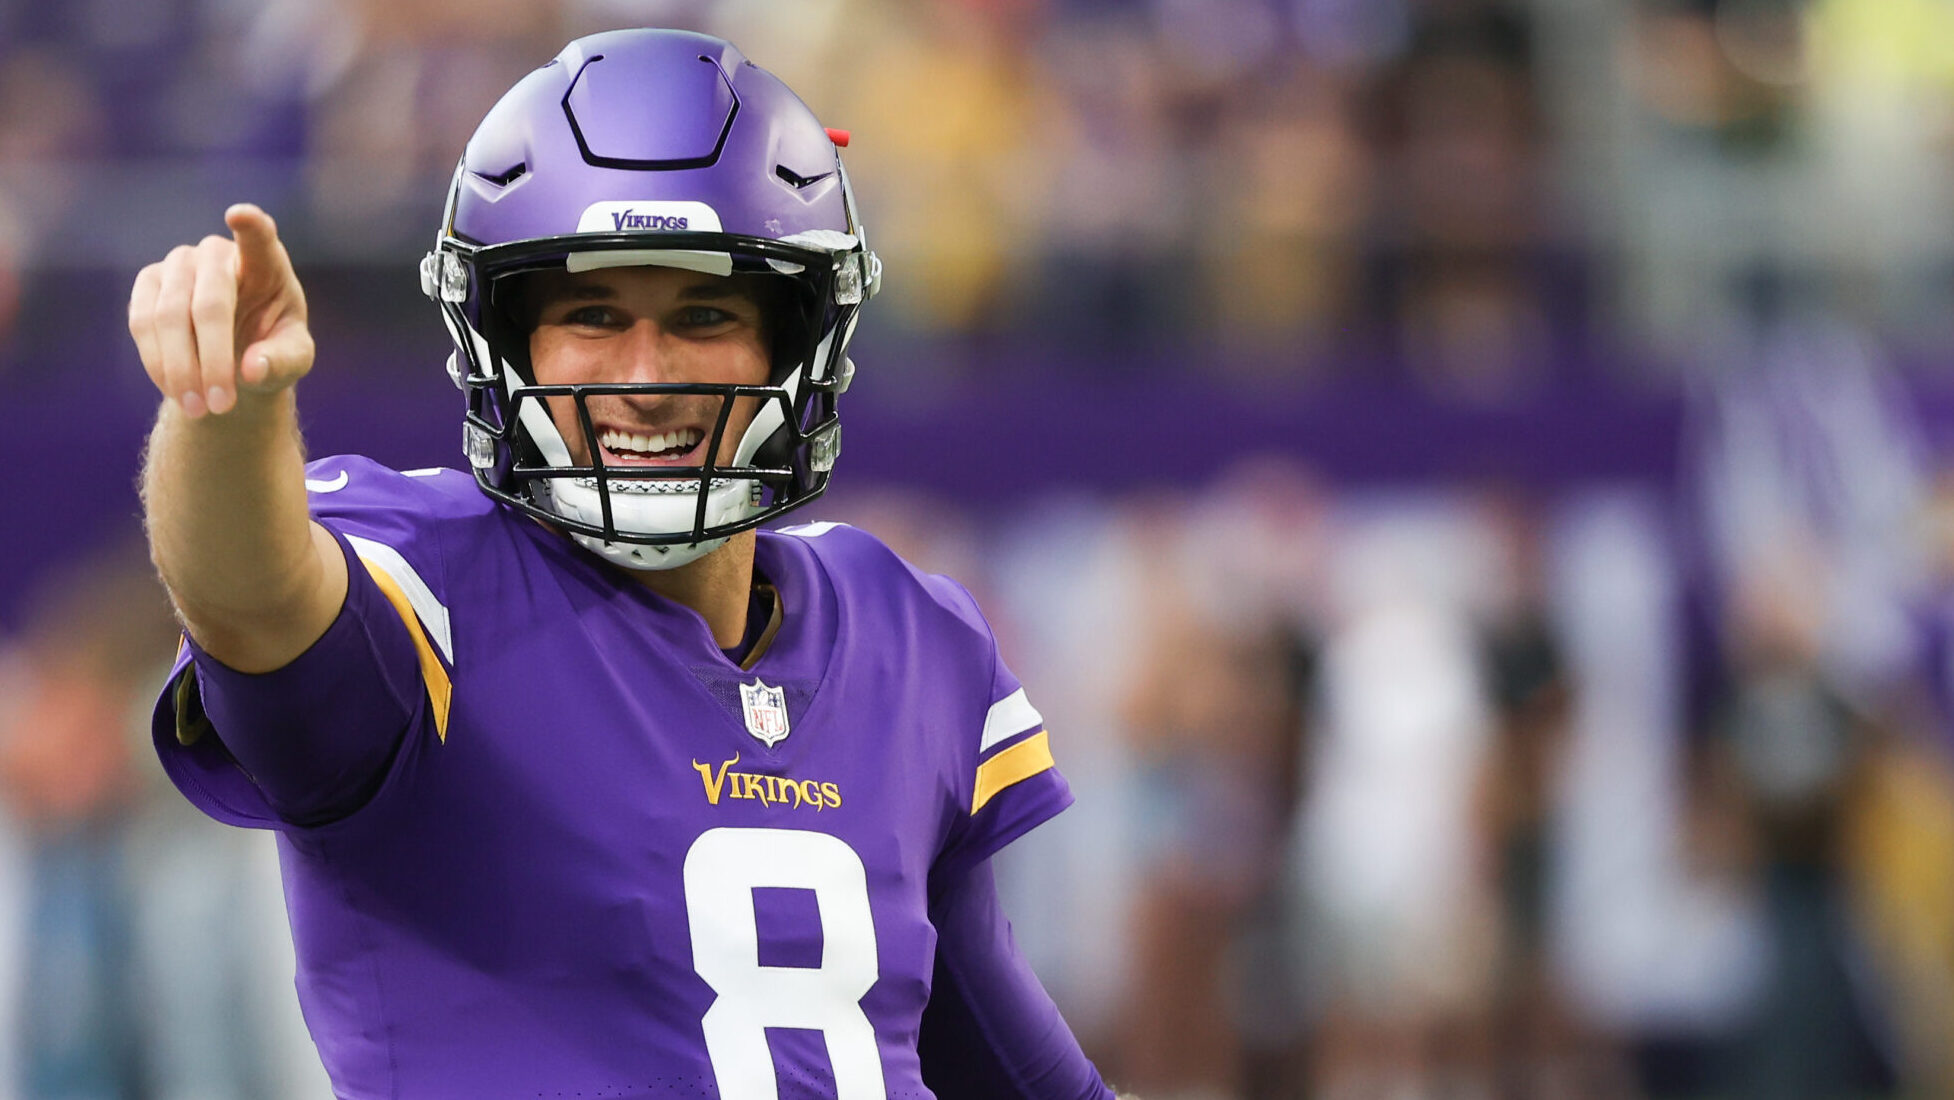 Vikings QB Kirk Cousins points in direction of camera